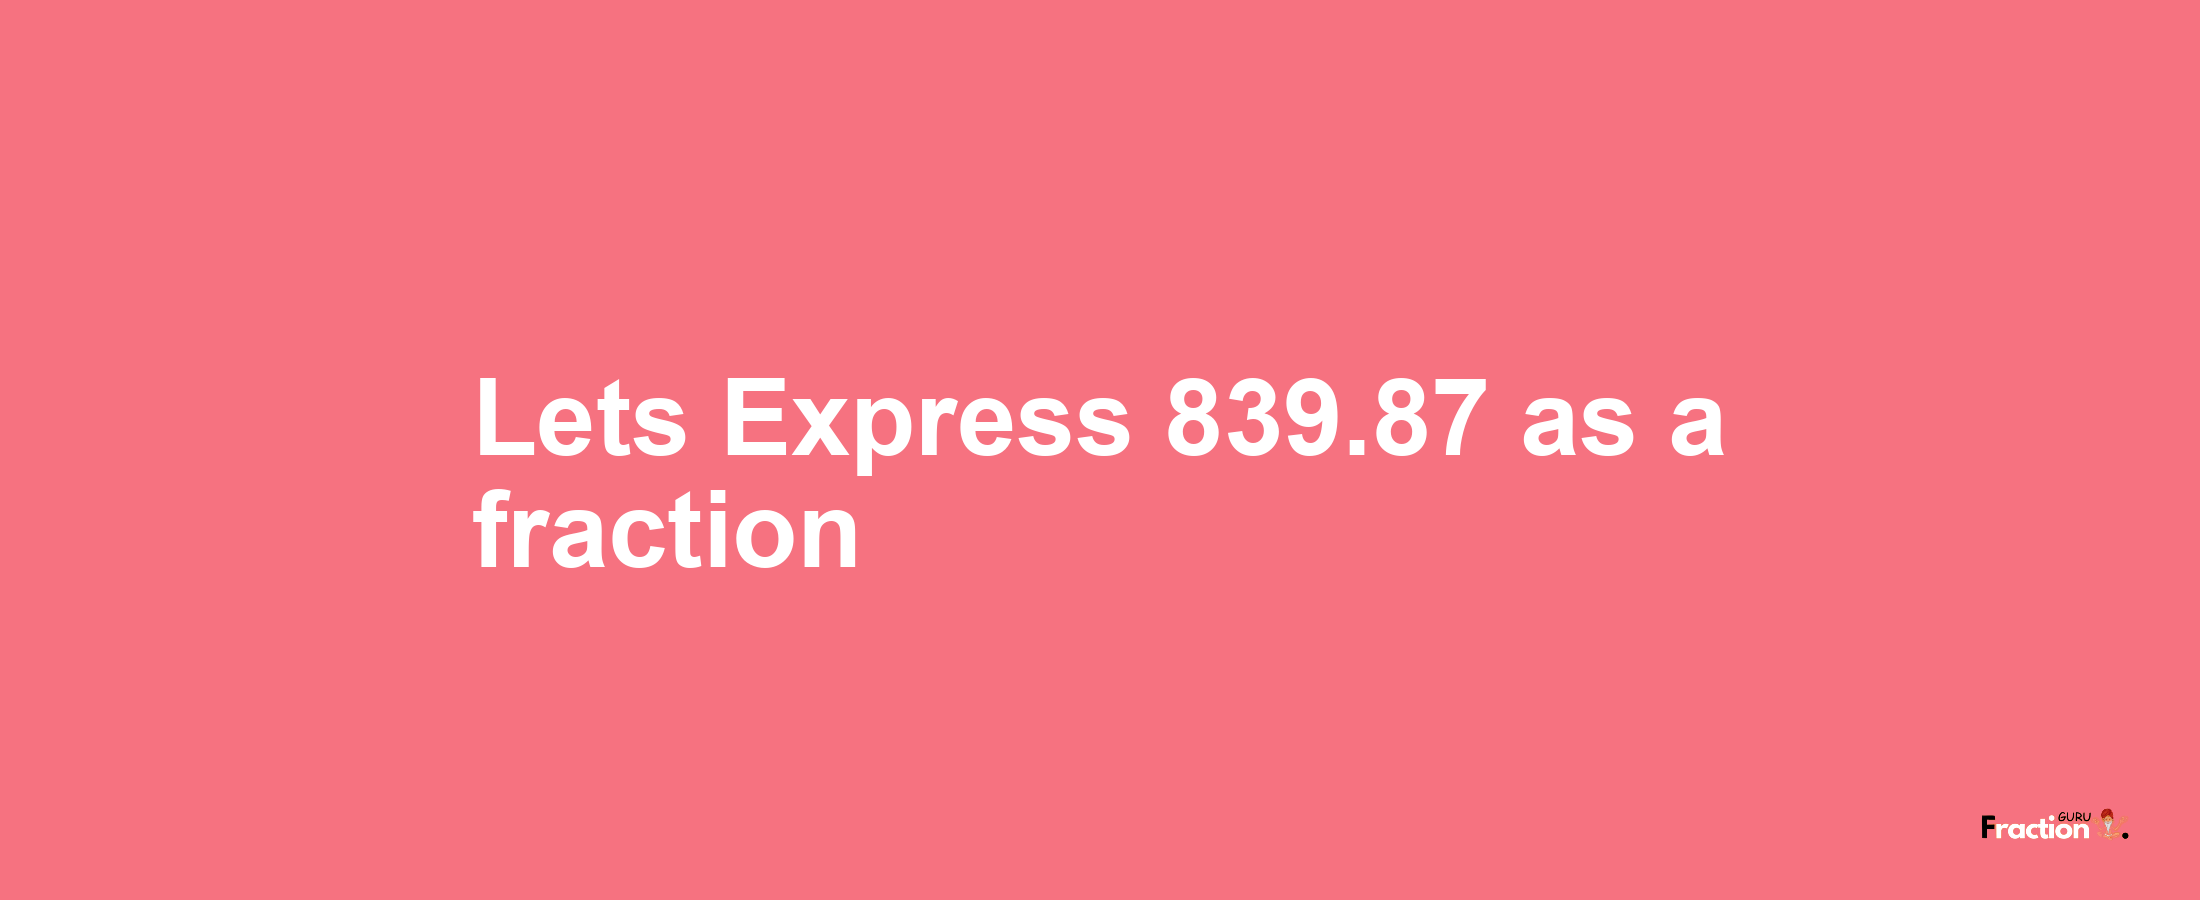 Lets Express 839.87 as afraction